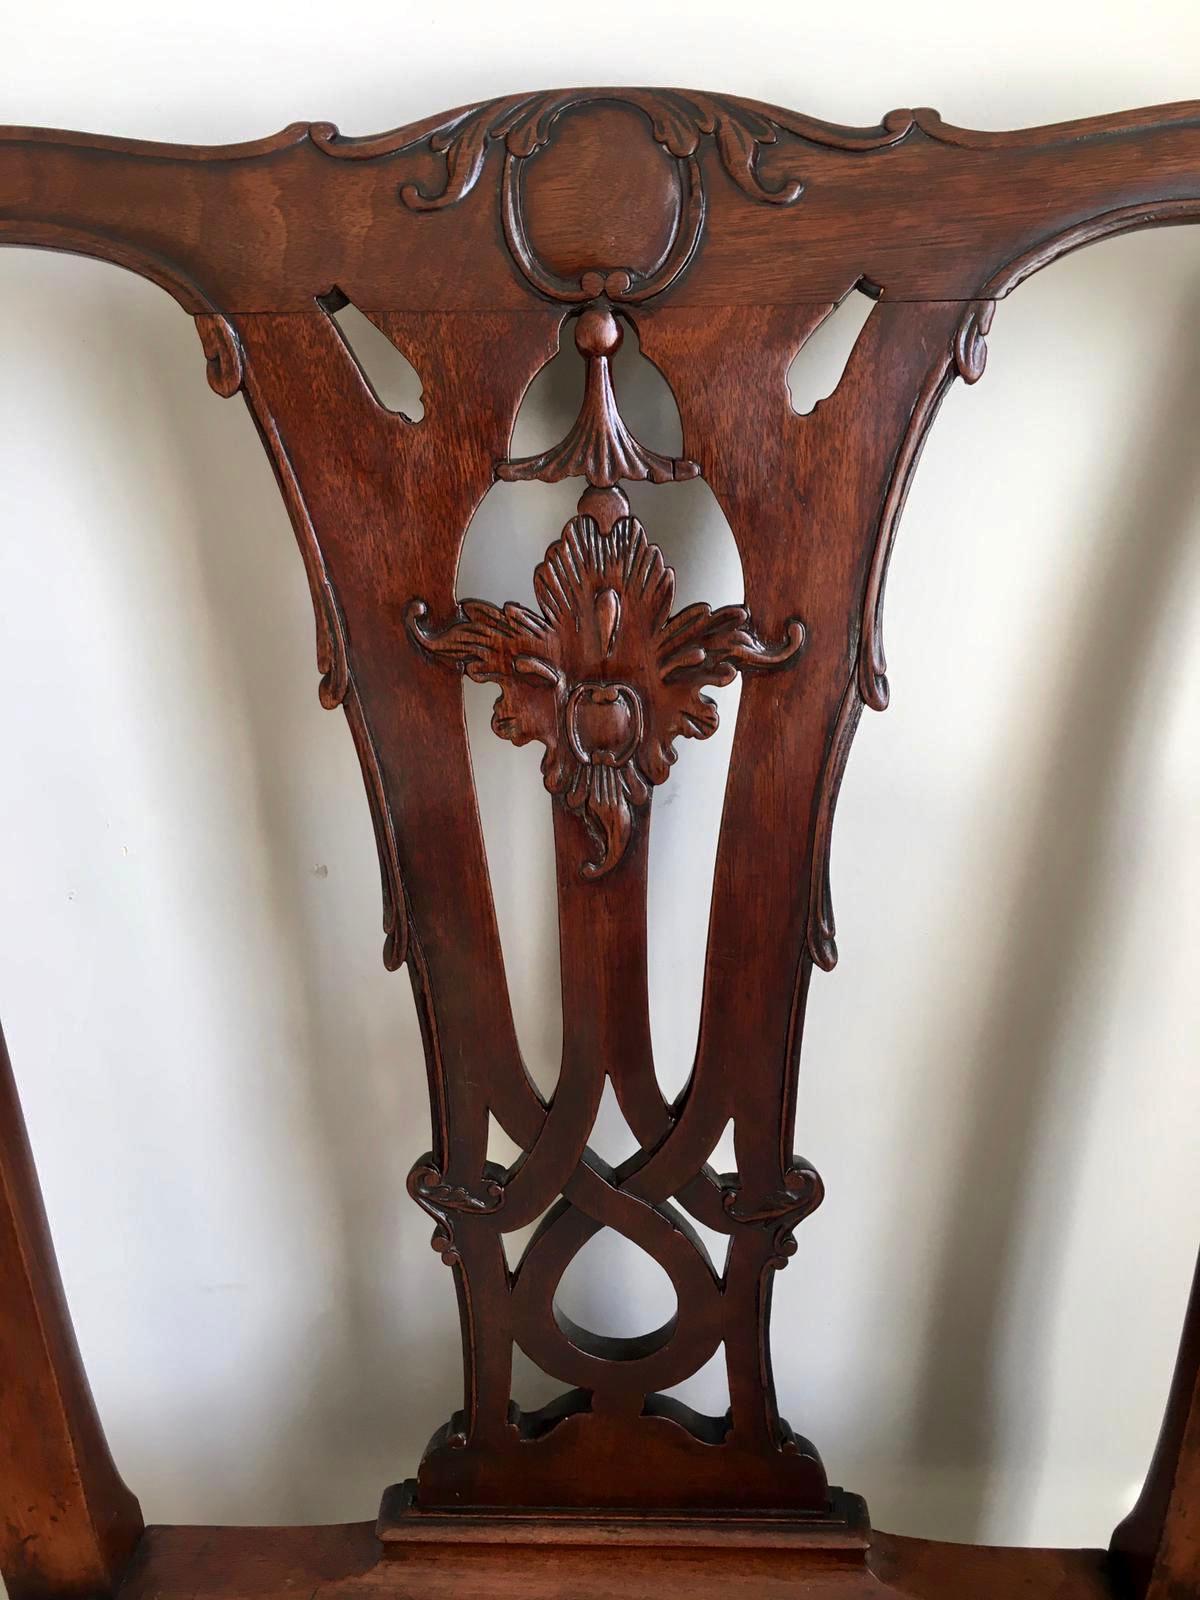 Other Antique George III Carved Mahogany Elbow/Desk Chair For Sale